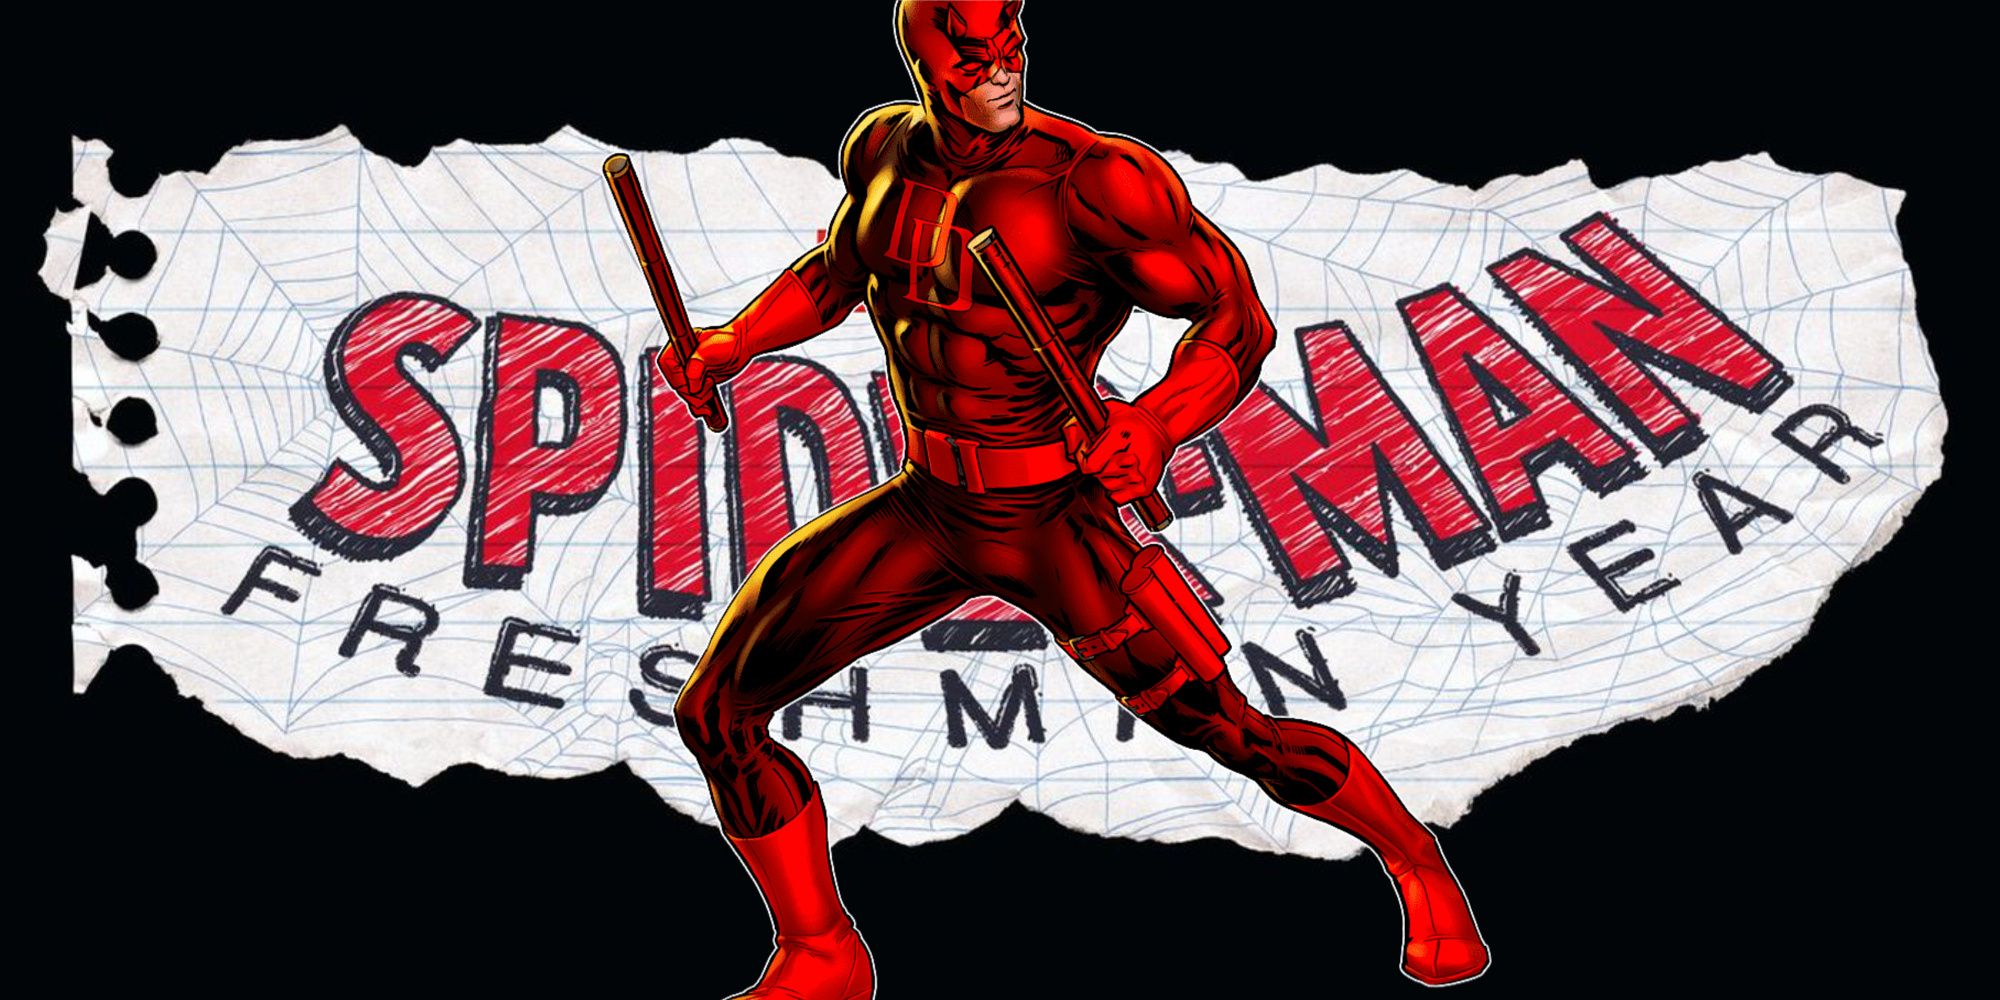 Blended image of Spider-Man: Freshman Year logo and Daredevil from the comics.